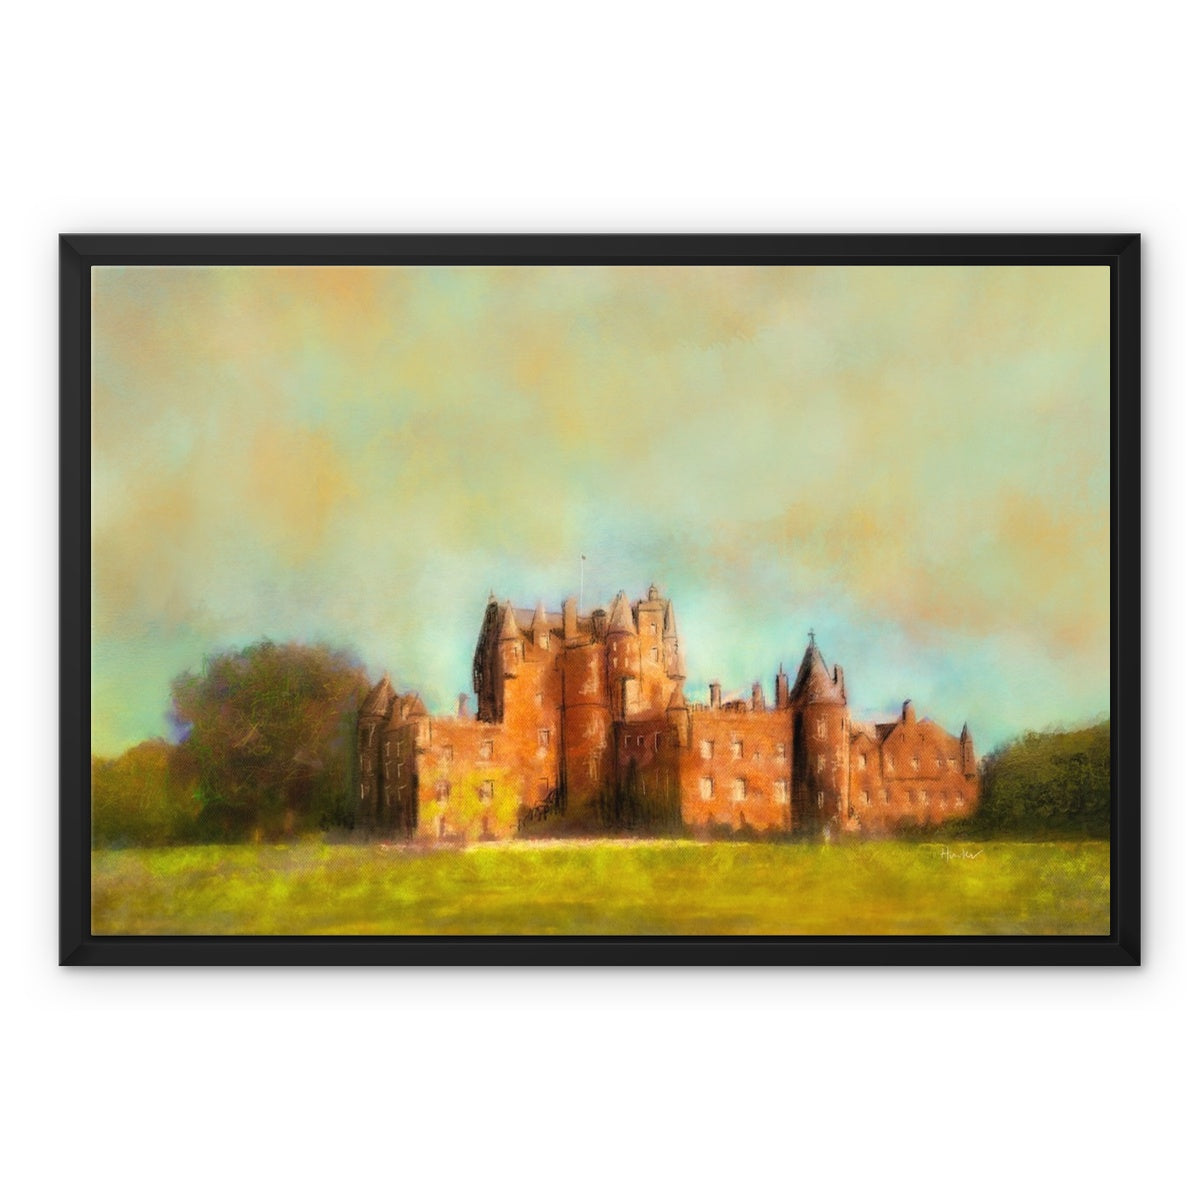 Glamis Castle Painting | Framed Canvas From Scotland-Floating Framed Canvas Prints-Scottish Castles Art Gallery-24"x18"-Black Frame-Paintings, Prints, Homeware, Art Gifts From Scotland By Scottish Artist Kevin Hunter